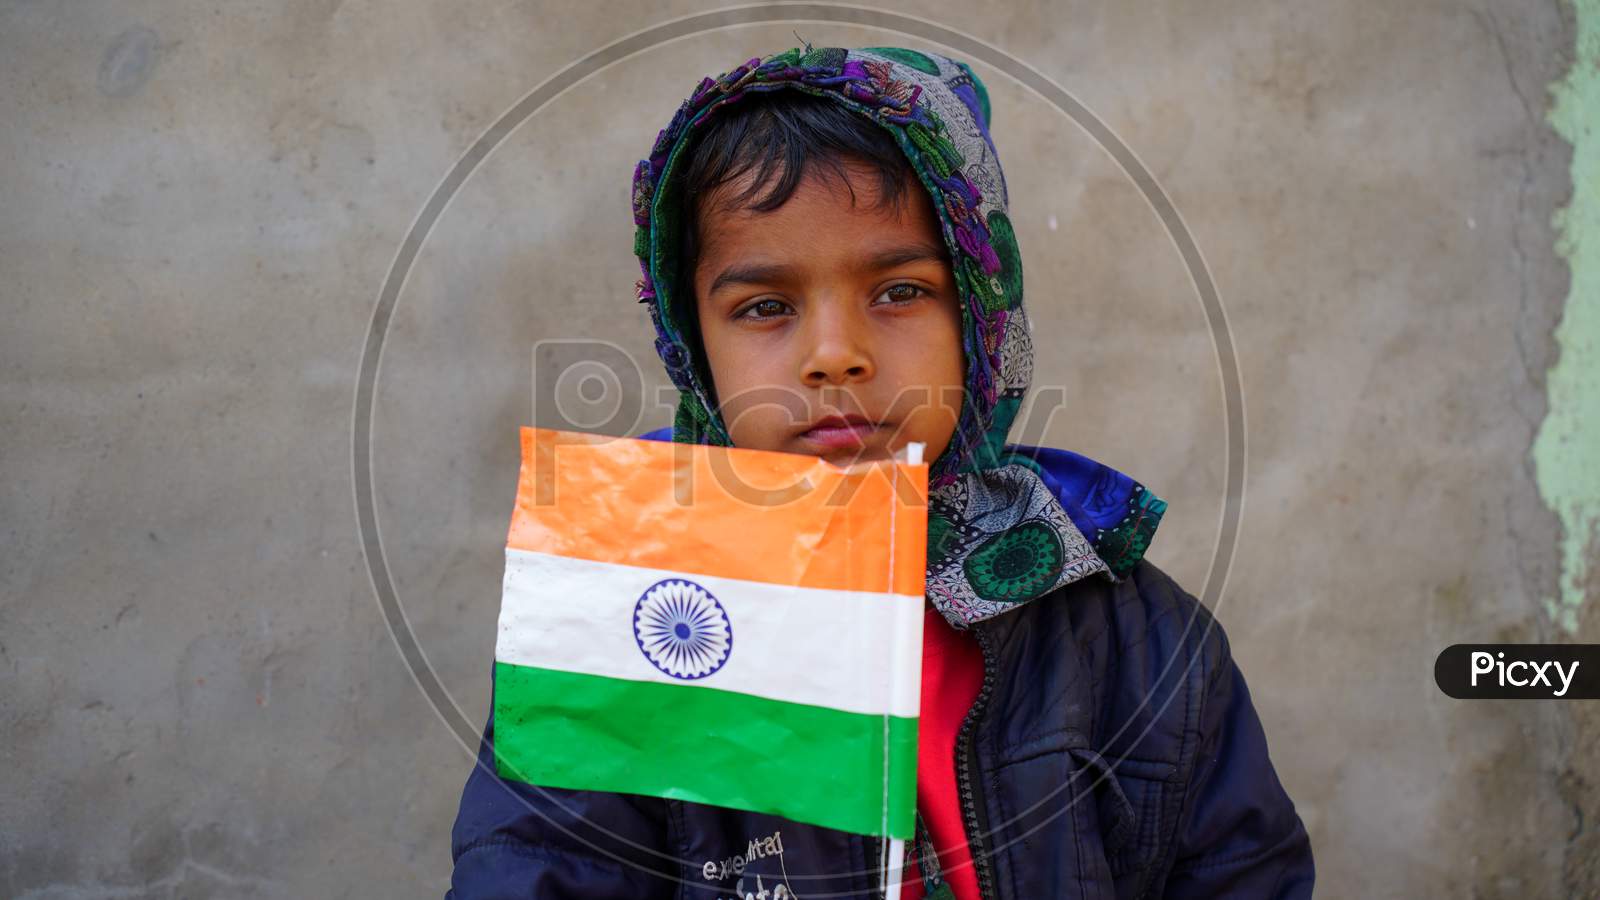 Cute Little Kid Holding The National Flag Of India. National Flag Or Tringa Closeup View On 72 Republic Day 2021.